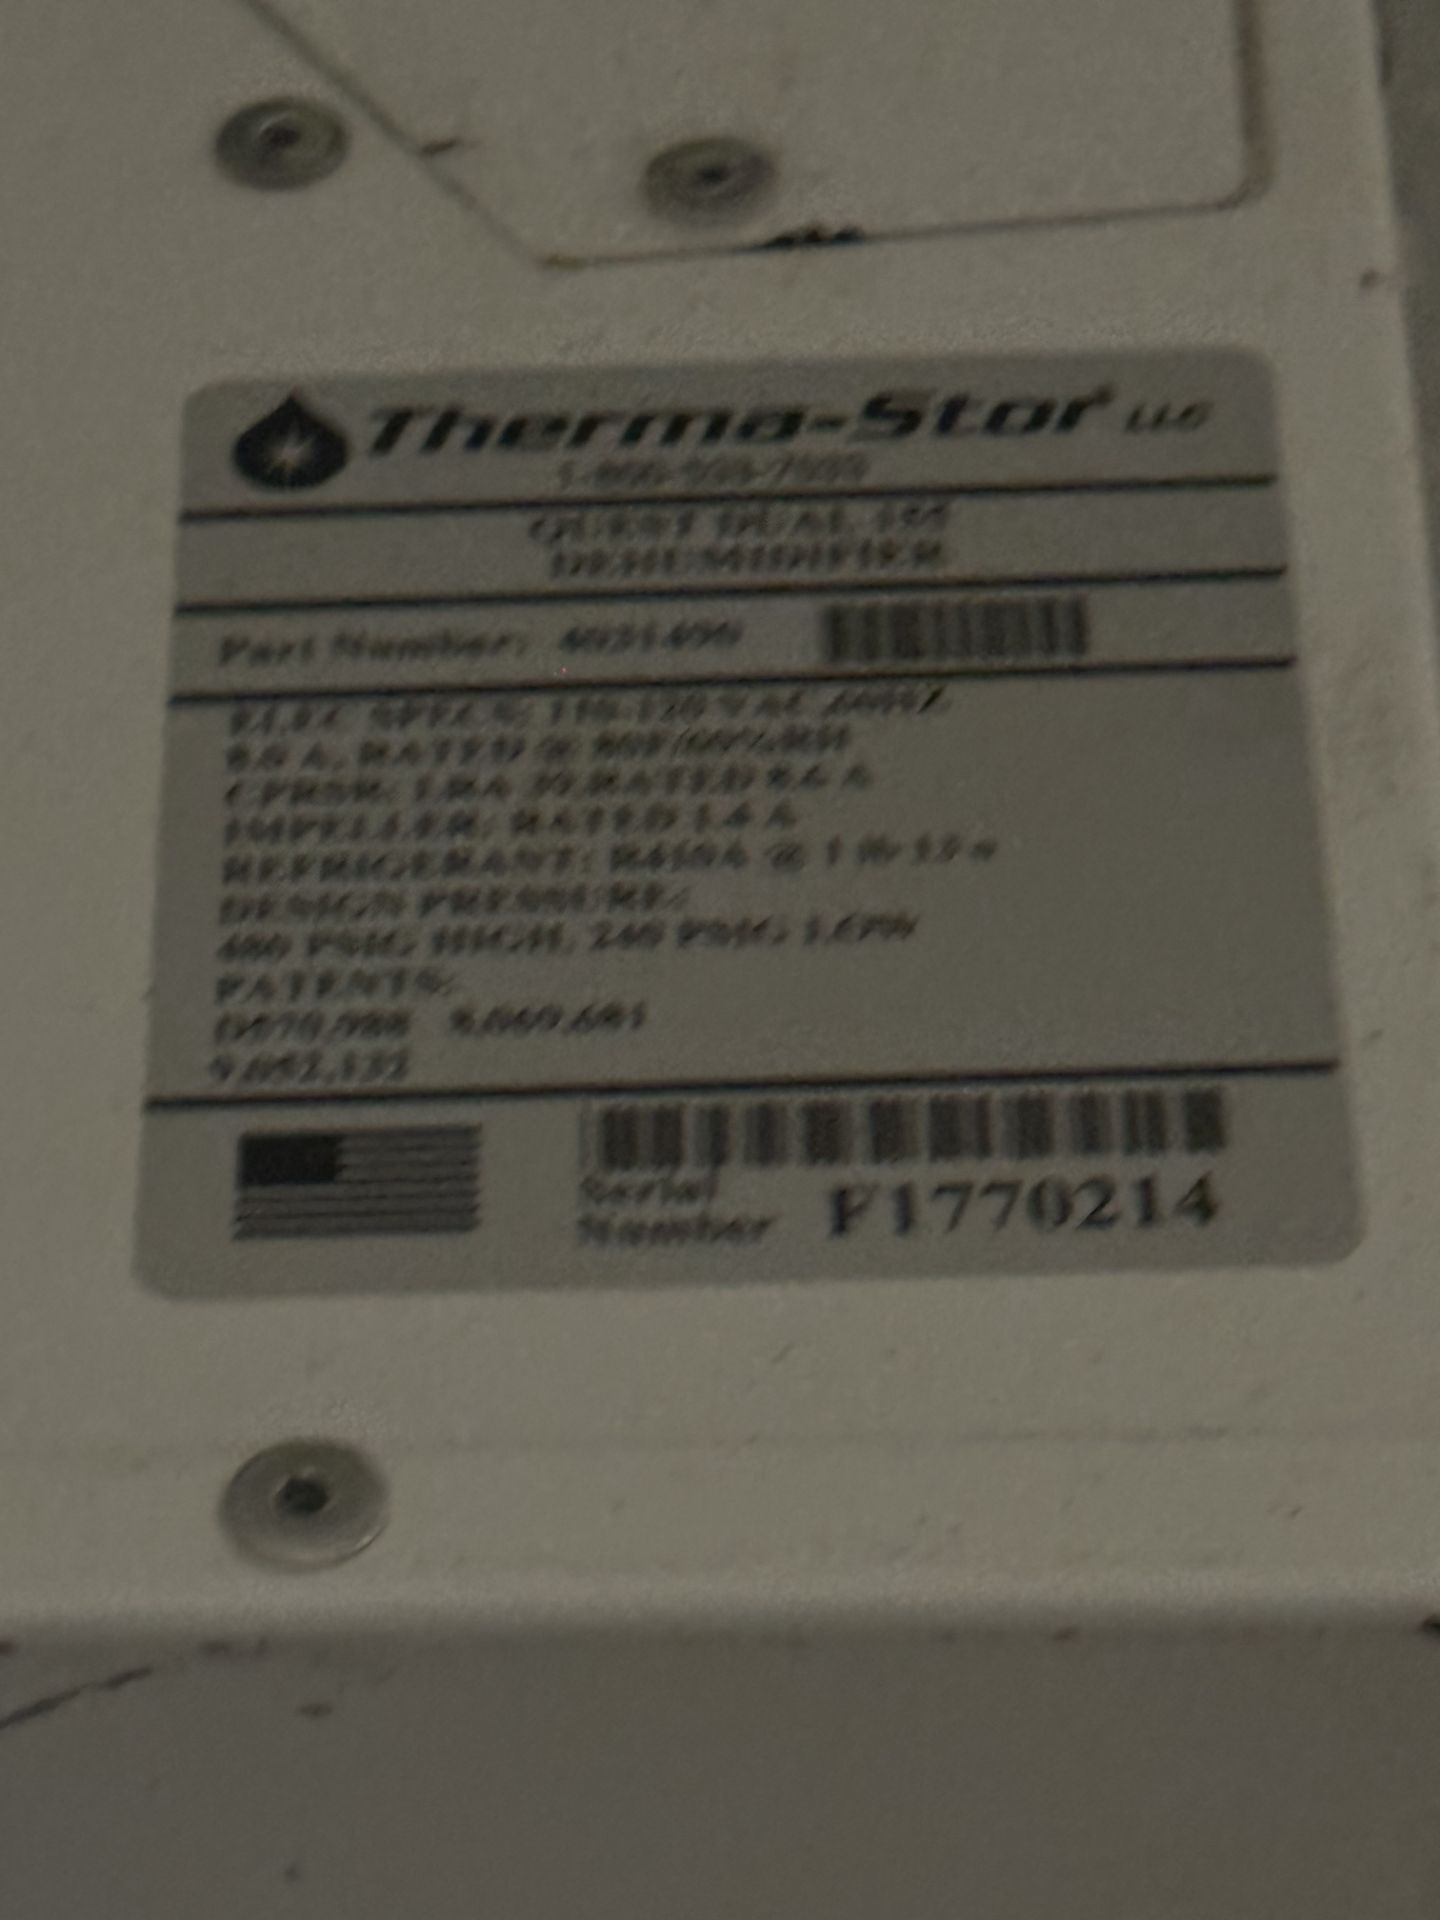 Used Quest Dehumidifier. Model Quest Dual 155. - Image 3 of 4